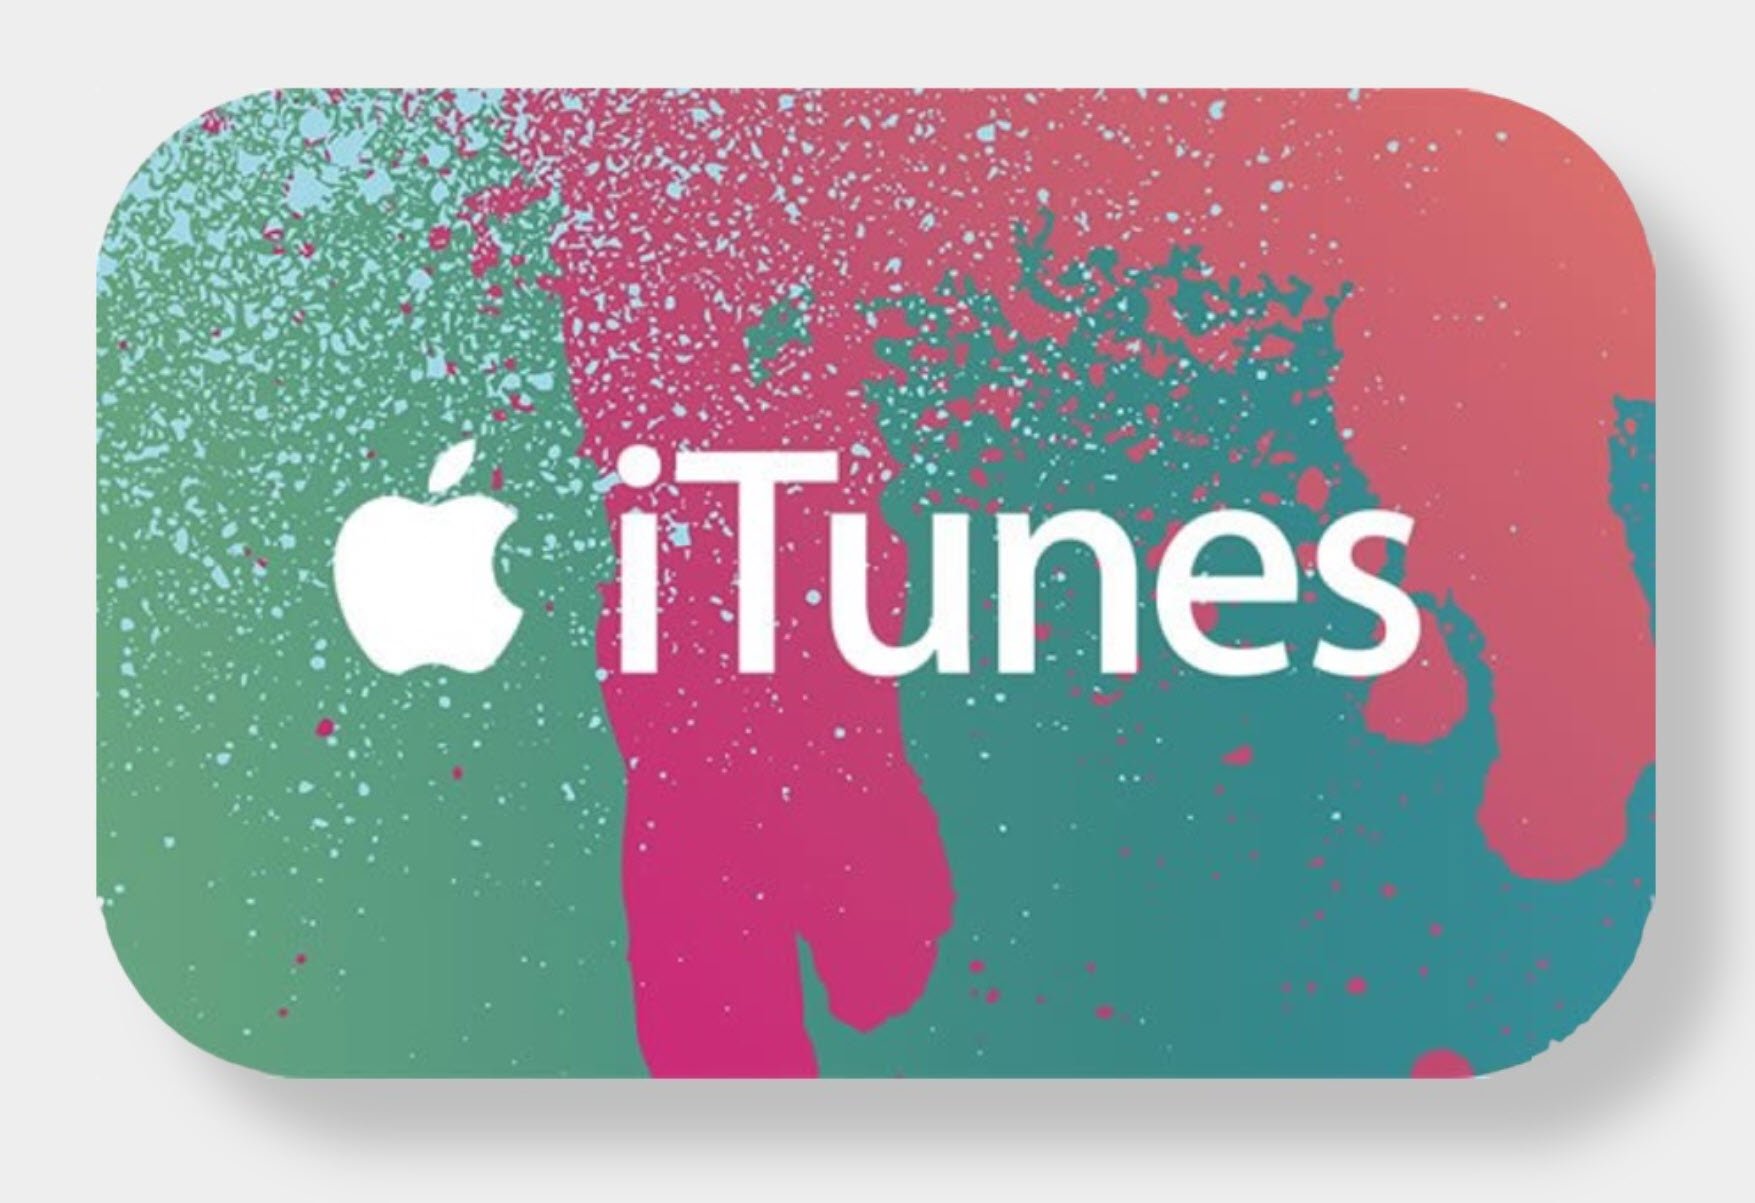 🏆Apple iTunes Gift Card 3000 RUBLES🏅PRICE🔥✅